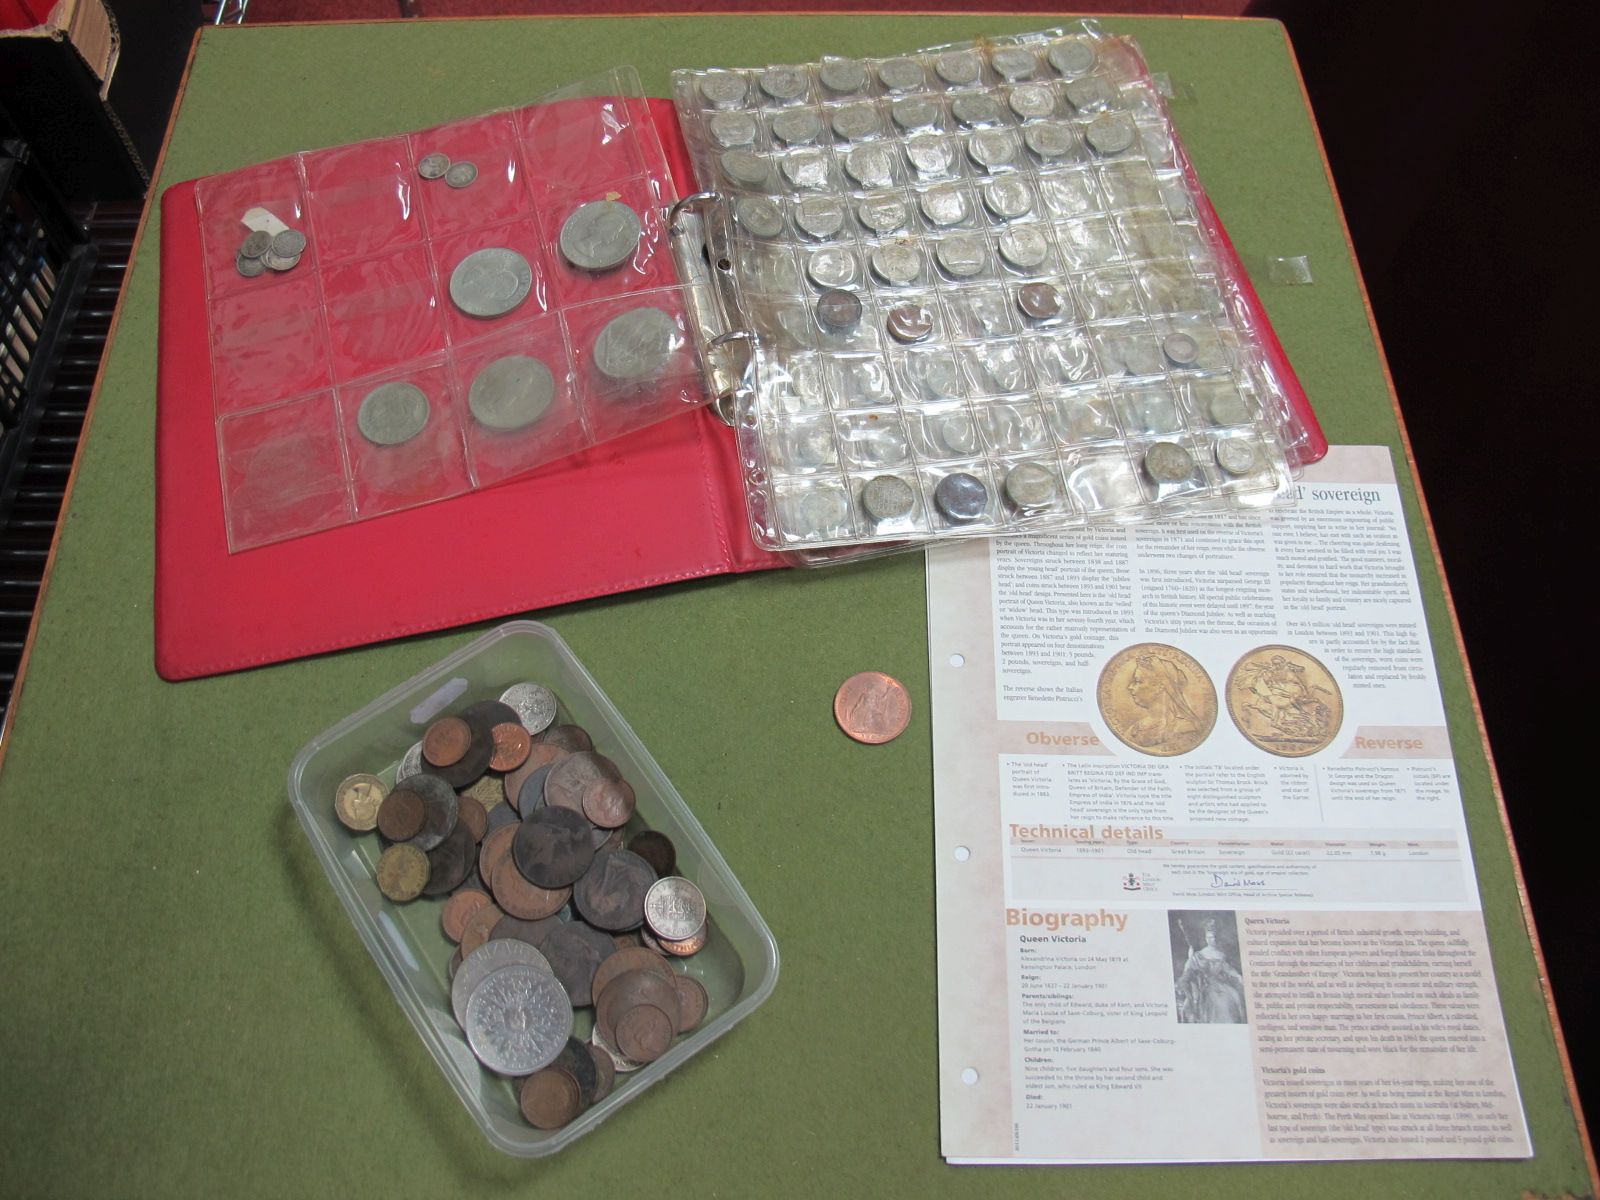 A Collection of GB Coins of Mixed Denominations, often in a loose leaf folder. Very occasionally the